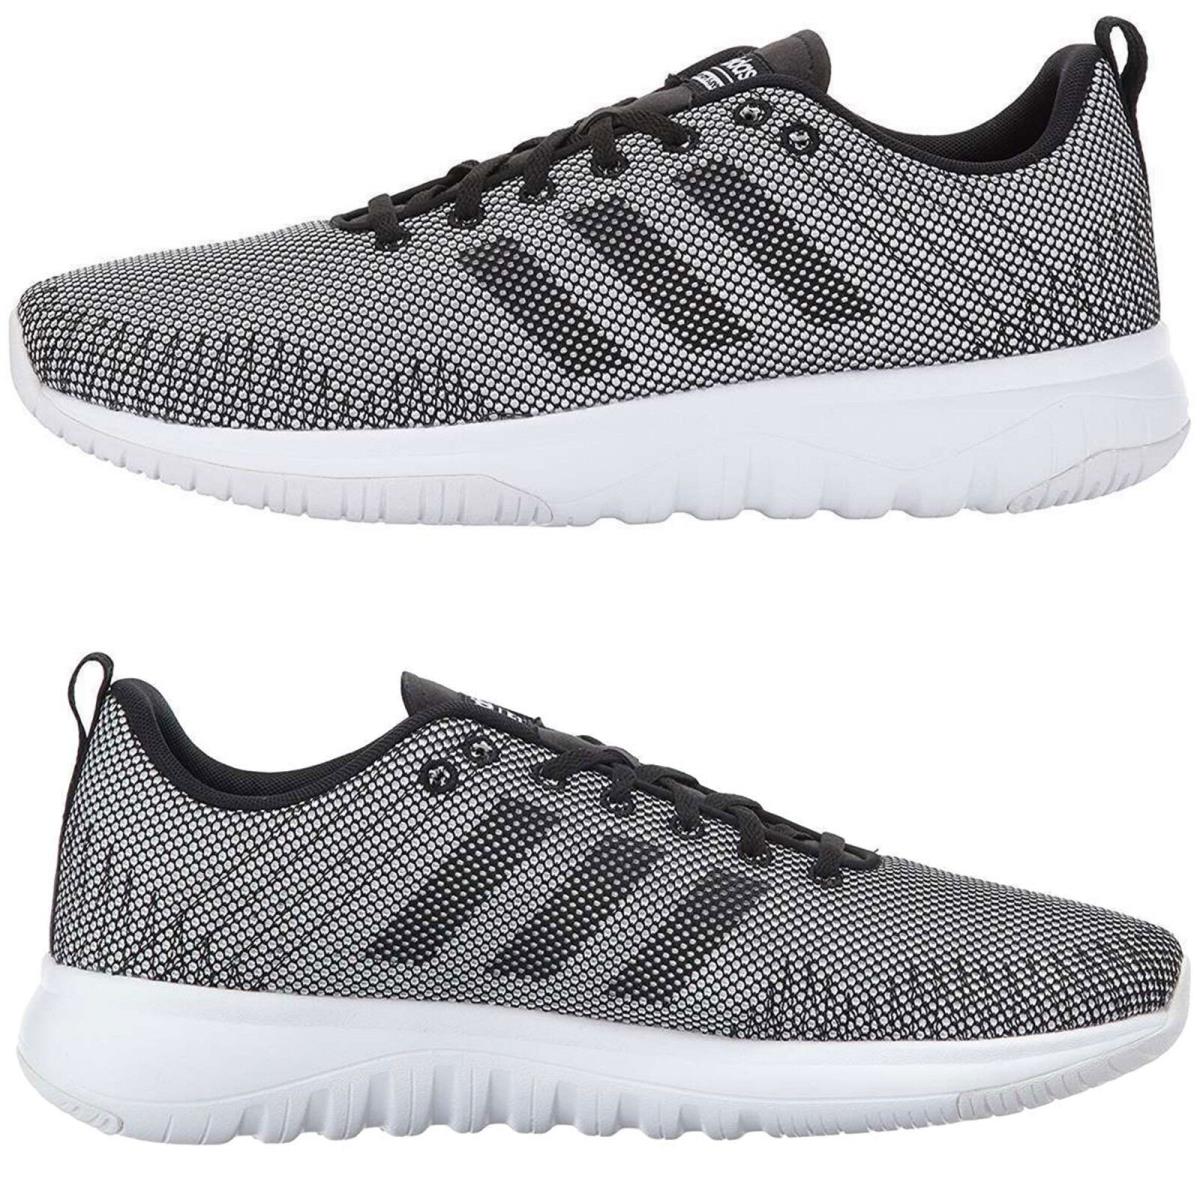 Adidas Women Athletic Shoes Cloudfoam Superflex Running Shoes Gray/white - Gray, White